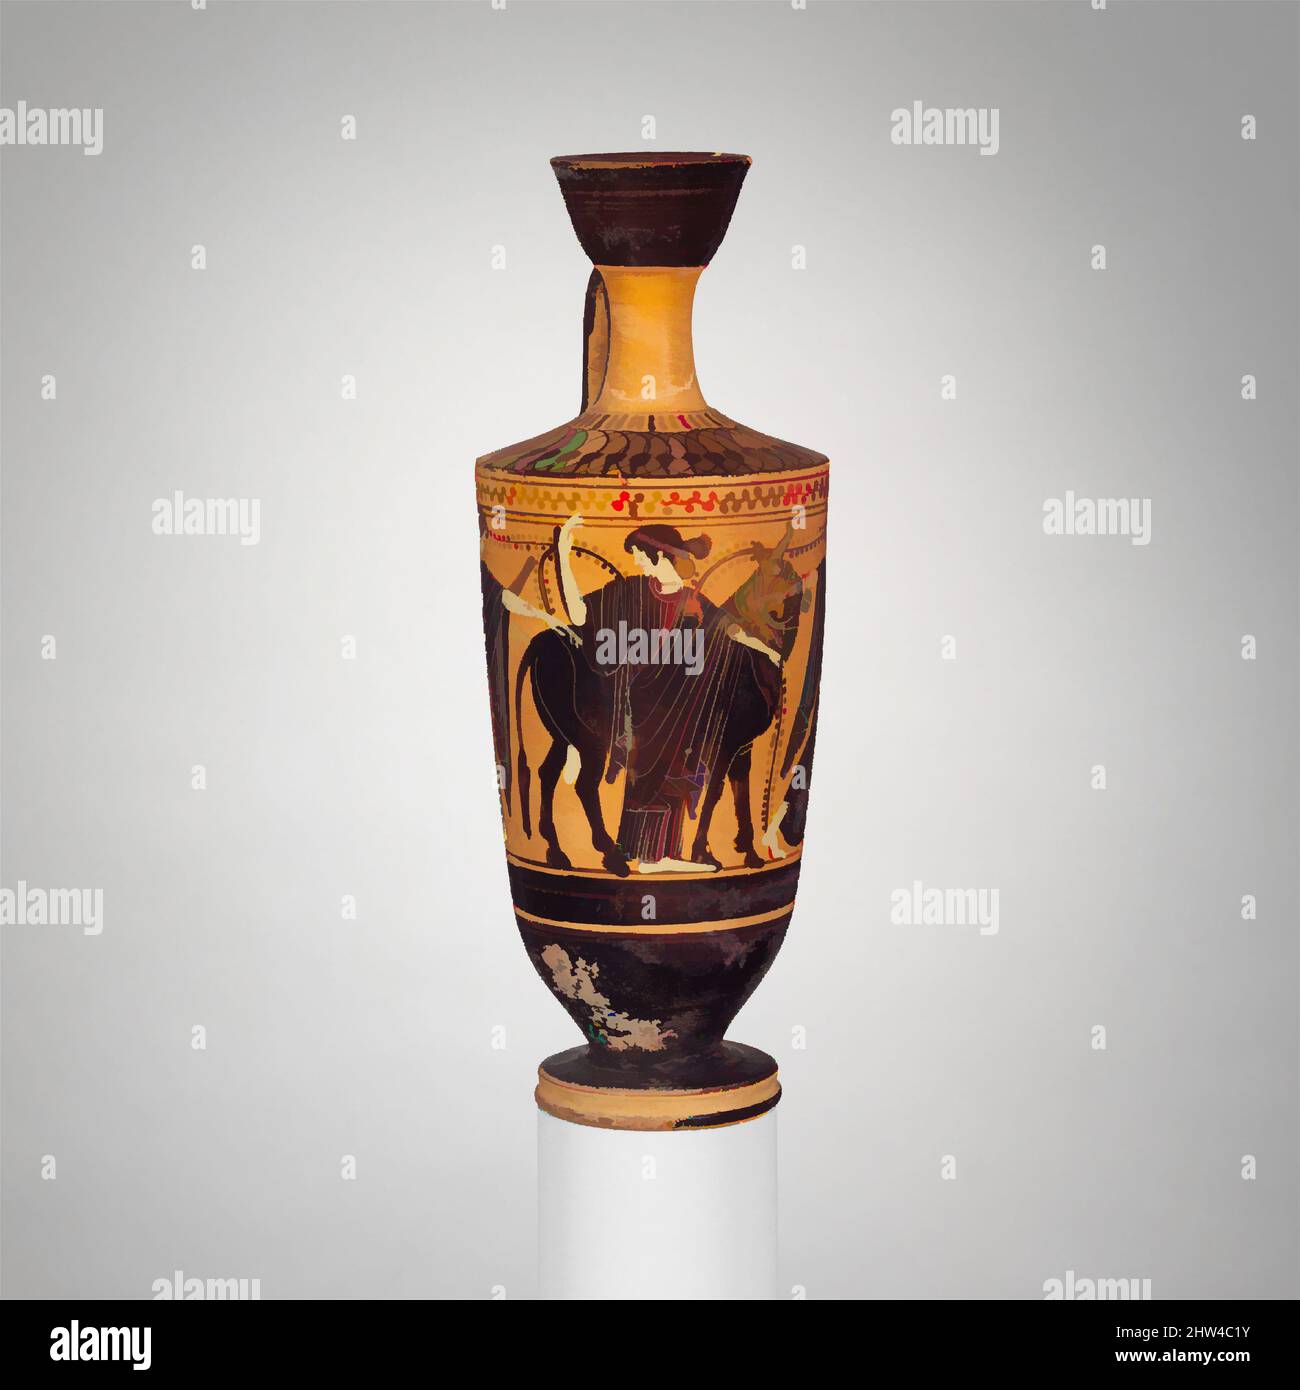 https://c8.alamy.com/comp/2HW4C1Y/art-inspired-by-terracotta-lekythos-oil-flask-late-archaic-1st-quarter-of-5th-century-bc-greek-attic-terracotta-black-figure-h-7-78-in-20-cm-vases-sacrificial-procession-with-bull-and-three-women-classic-works-modernized-by-artotop-with-a-splash-of-modernity-shapes-color-and-value-eye-catching-visual-impact-on-art-emotions-through-freedom-of-artworks-in-a-contemporary-way-a-timeless-message-pursuing-a-wildly-creative-new-direction-artists-turning-to-the-digital-medium-and-creating-the-artotop-nft-2HW4C1Y.jpg